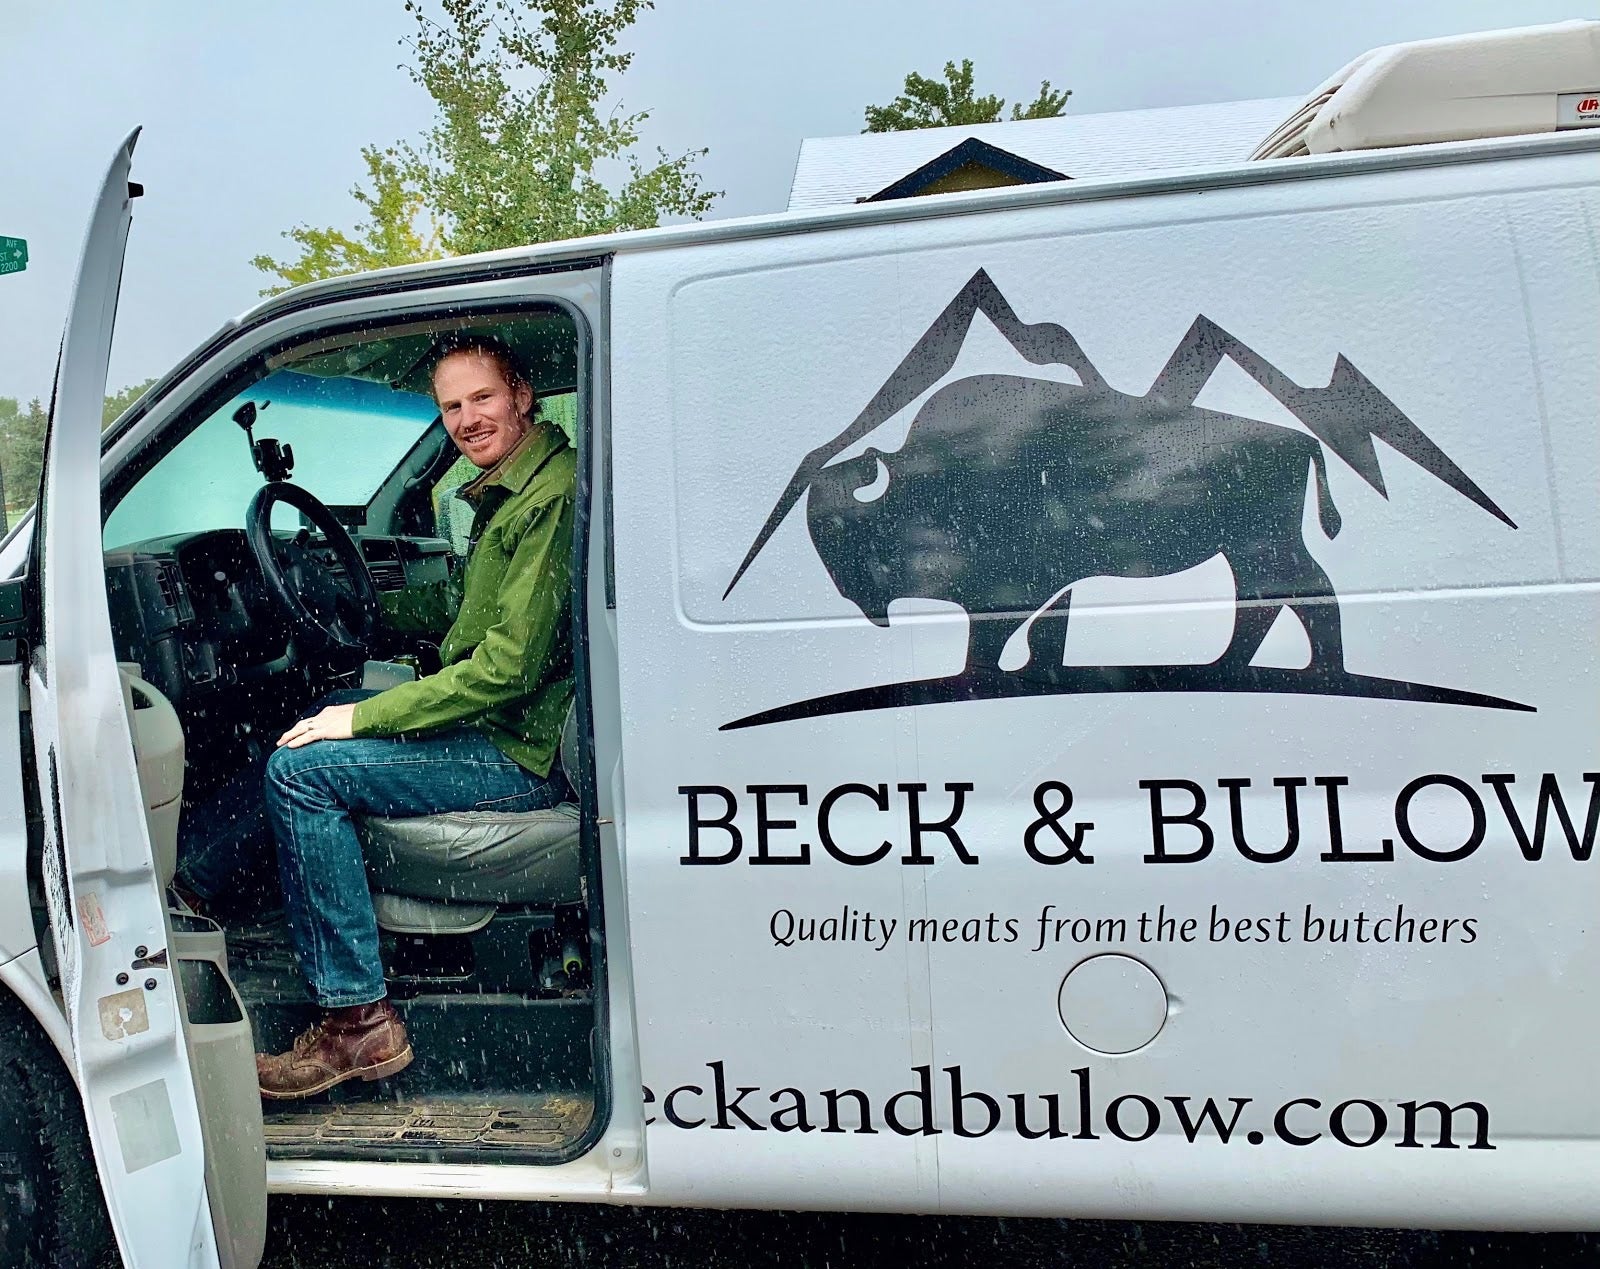 We’re Eagerly Anticipating The Opening Of Our Butcher Shop - Beck & Bulow